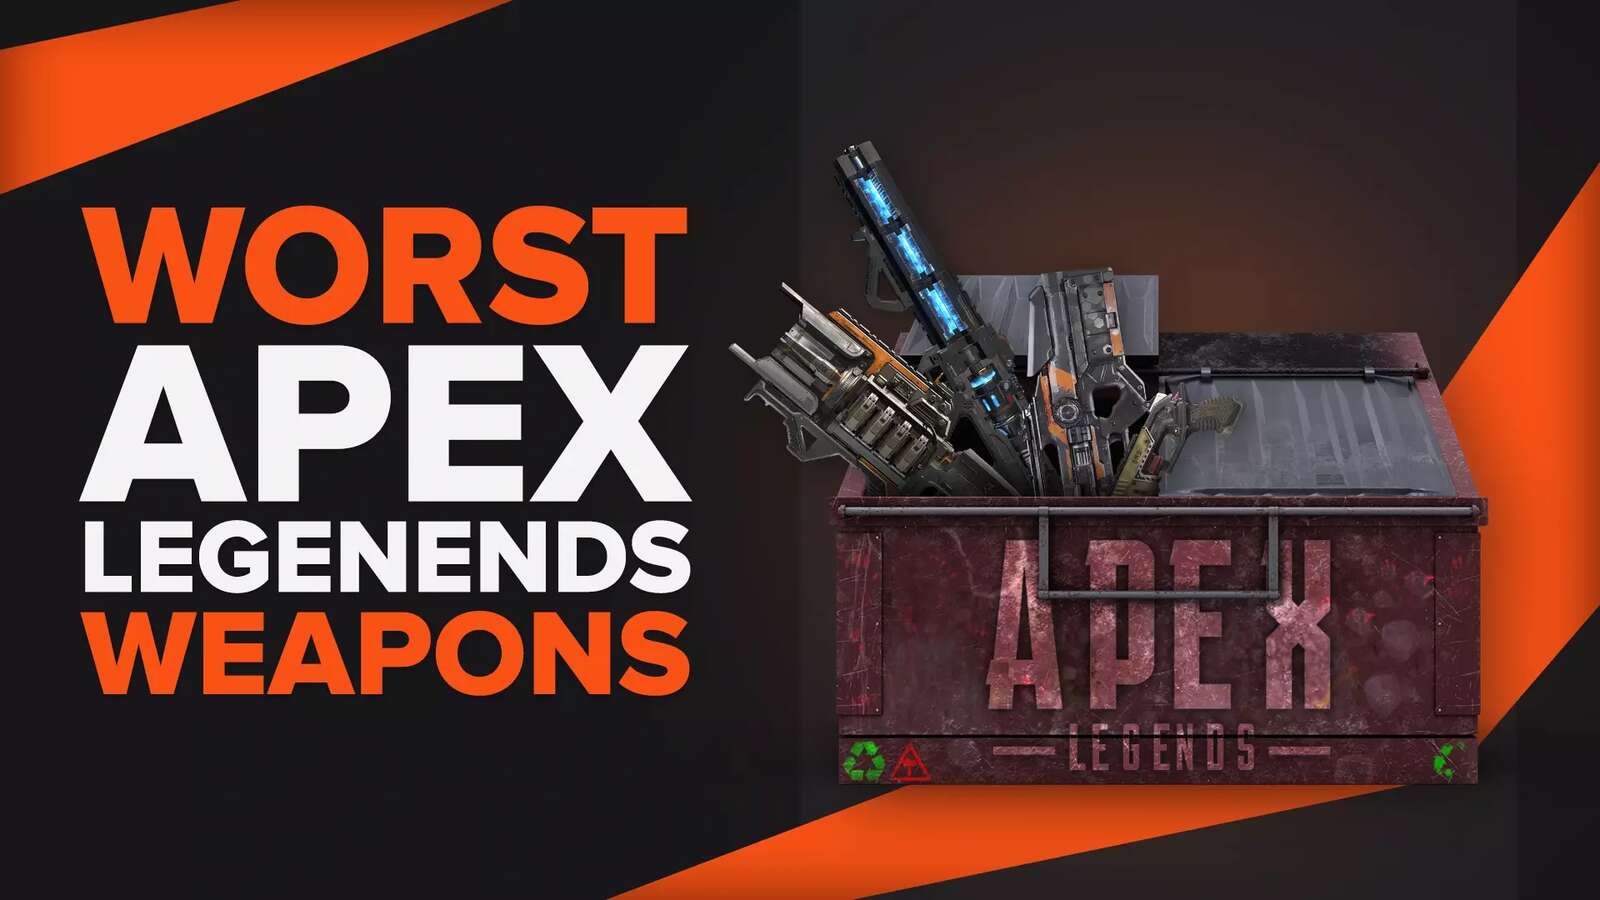 8 Worst Weapons That You Should Avoid in Apex Legends